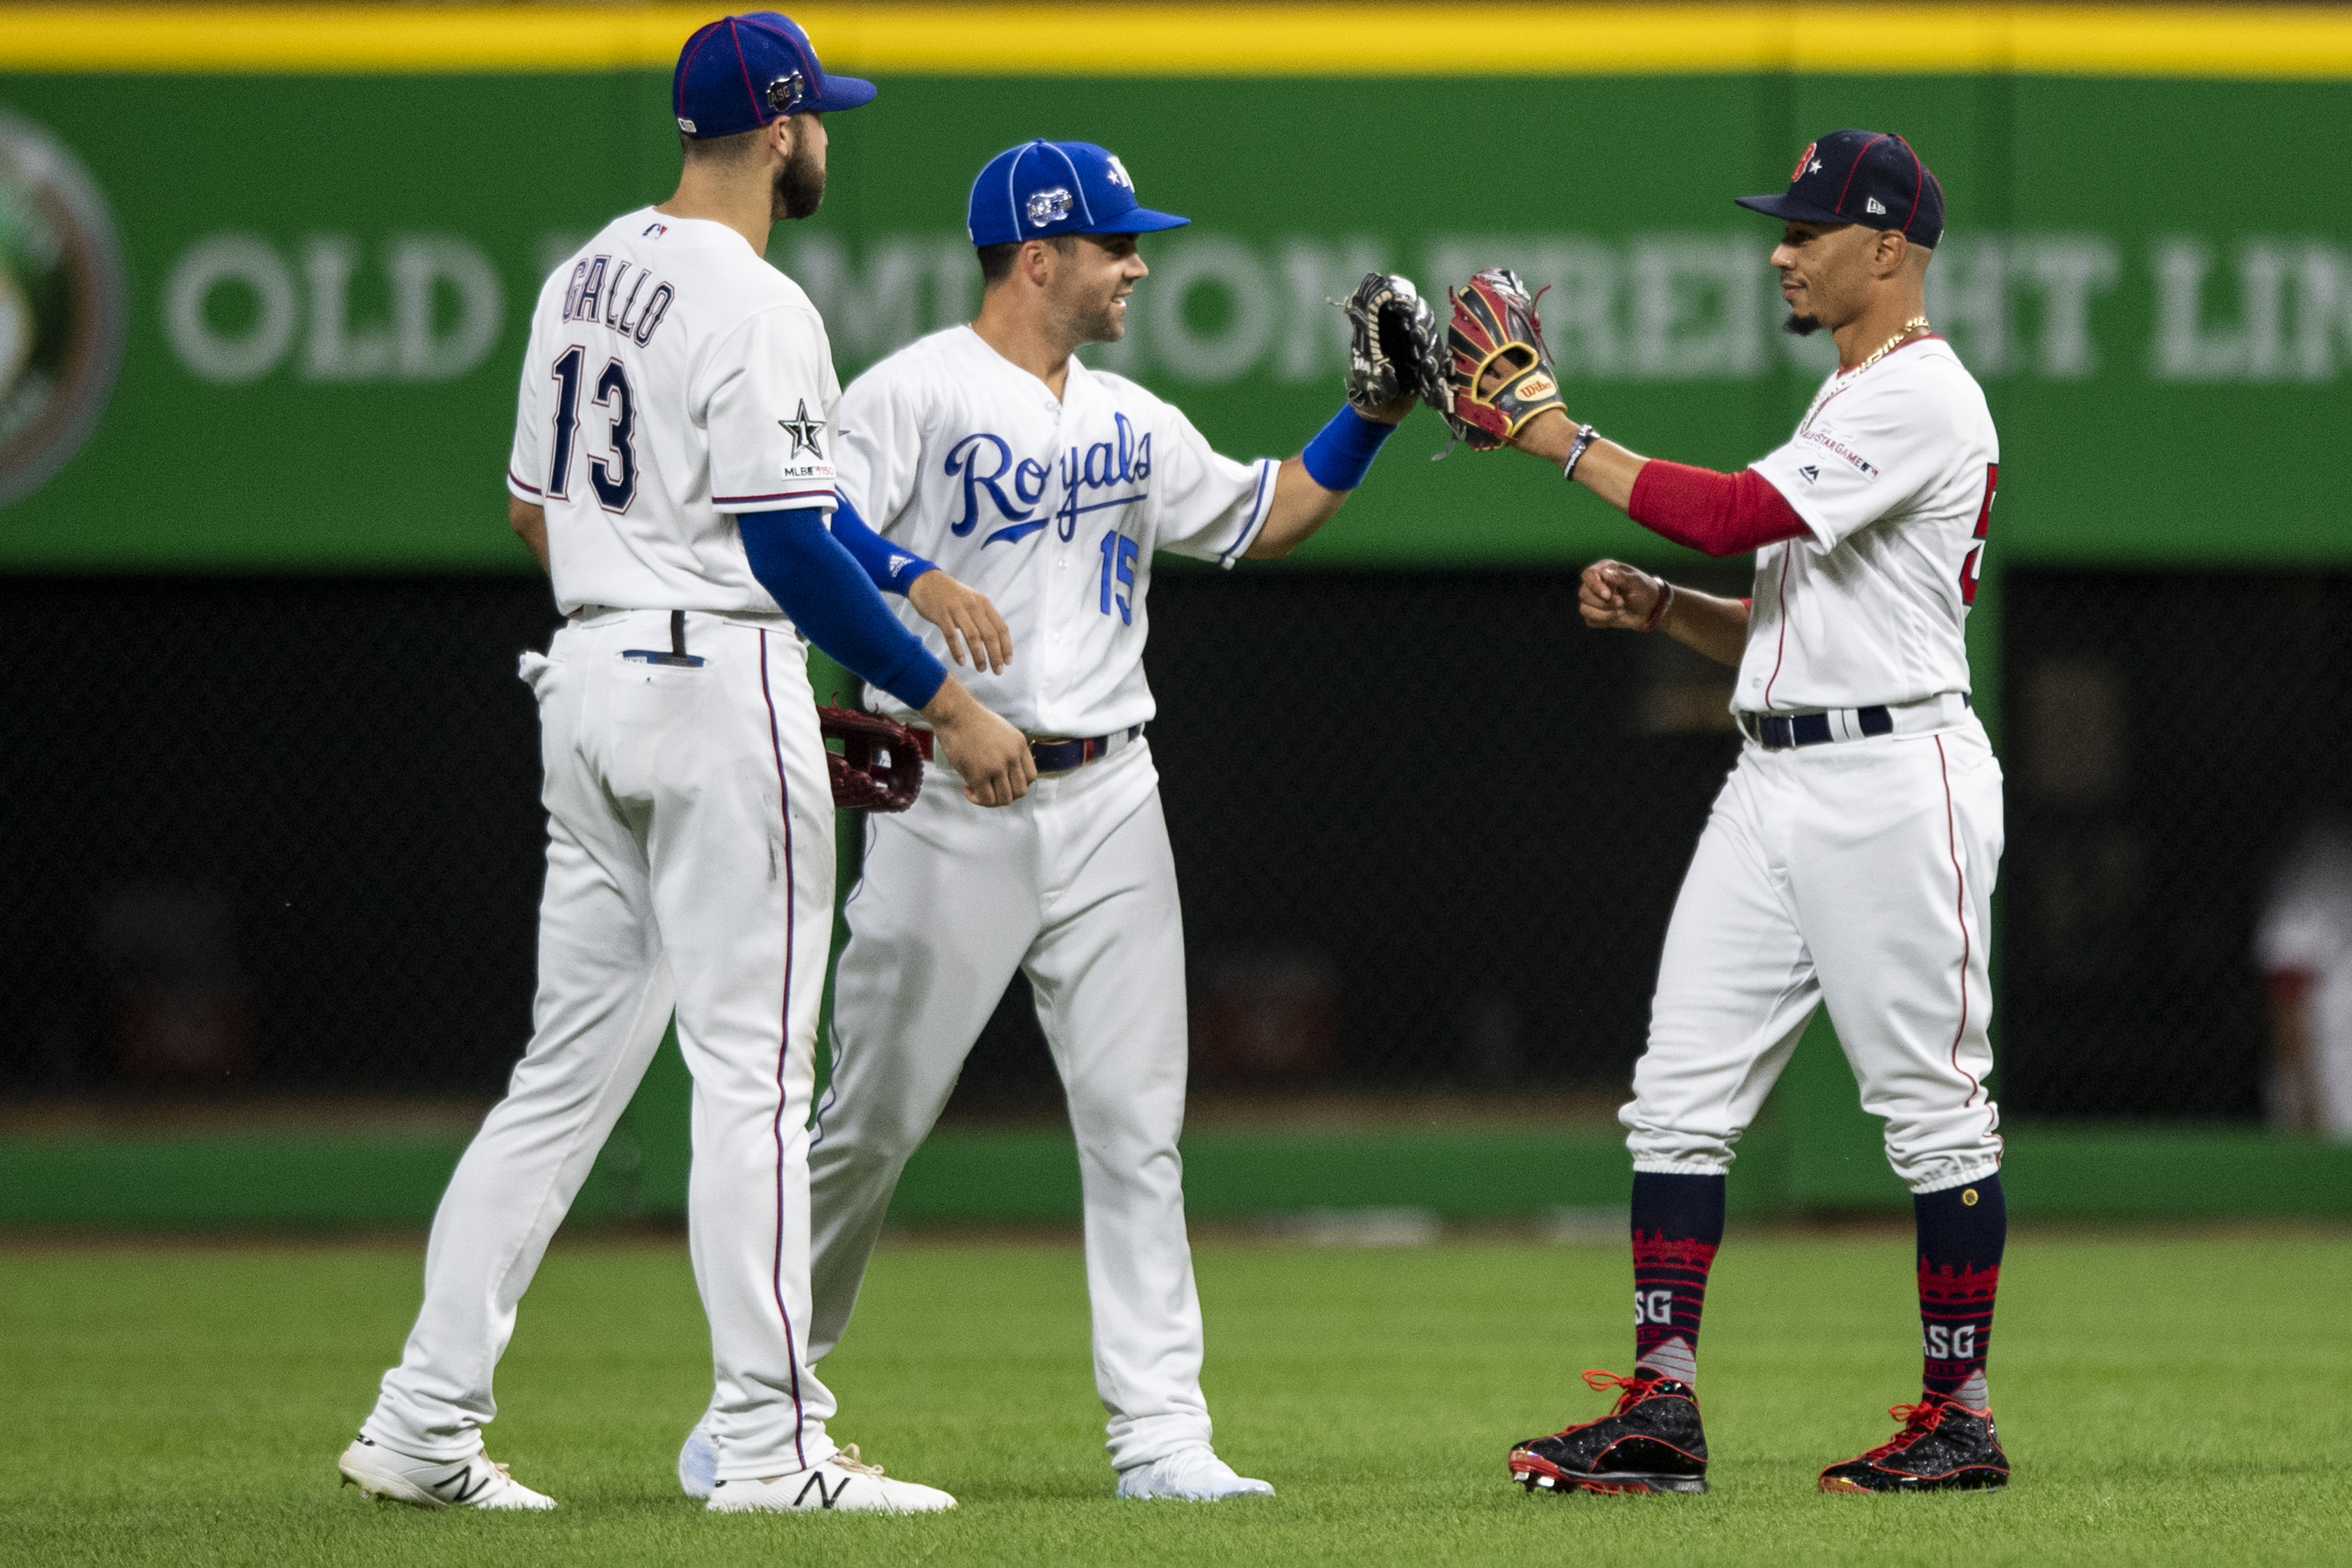 2019 MLB All-Star Game, presented by Mastercard